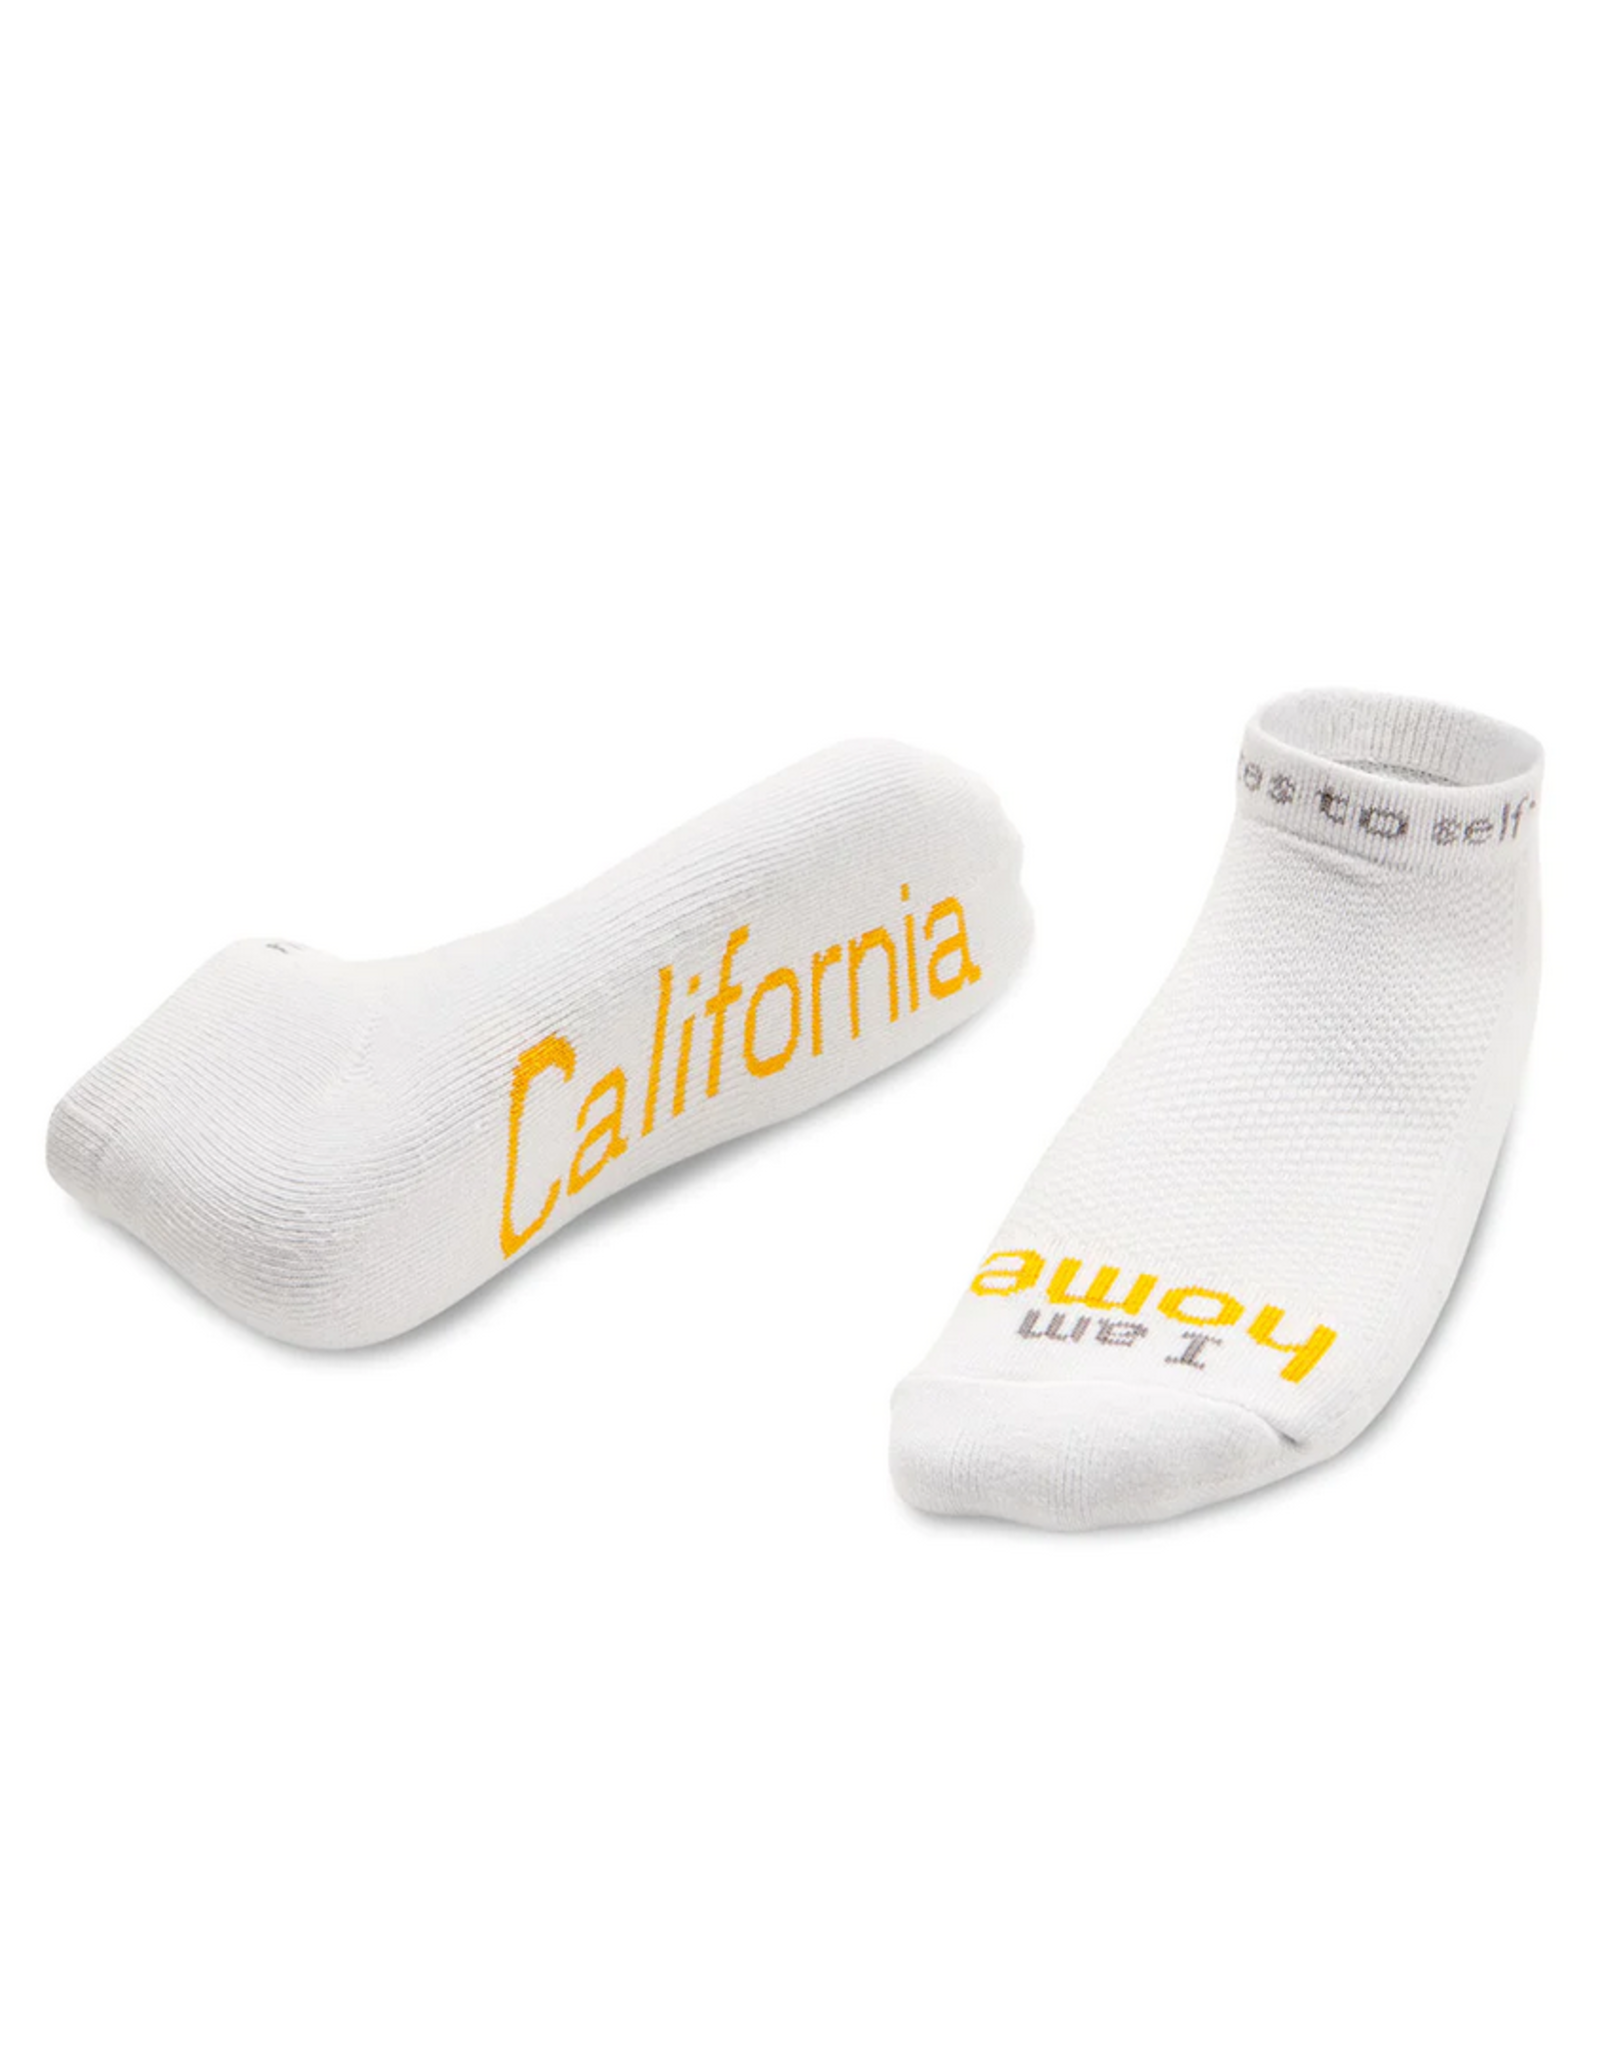 notes to self Notes to Self HOME 'California' Low-Cut Socks